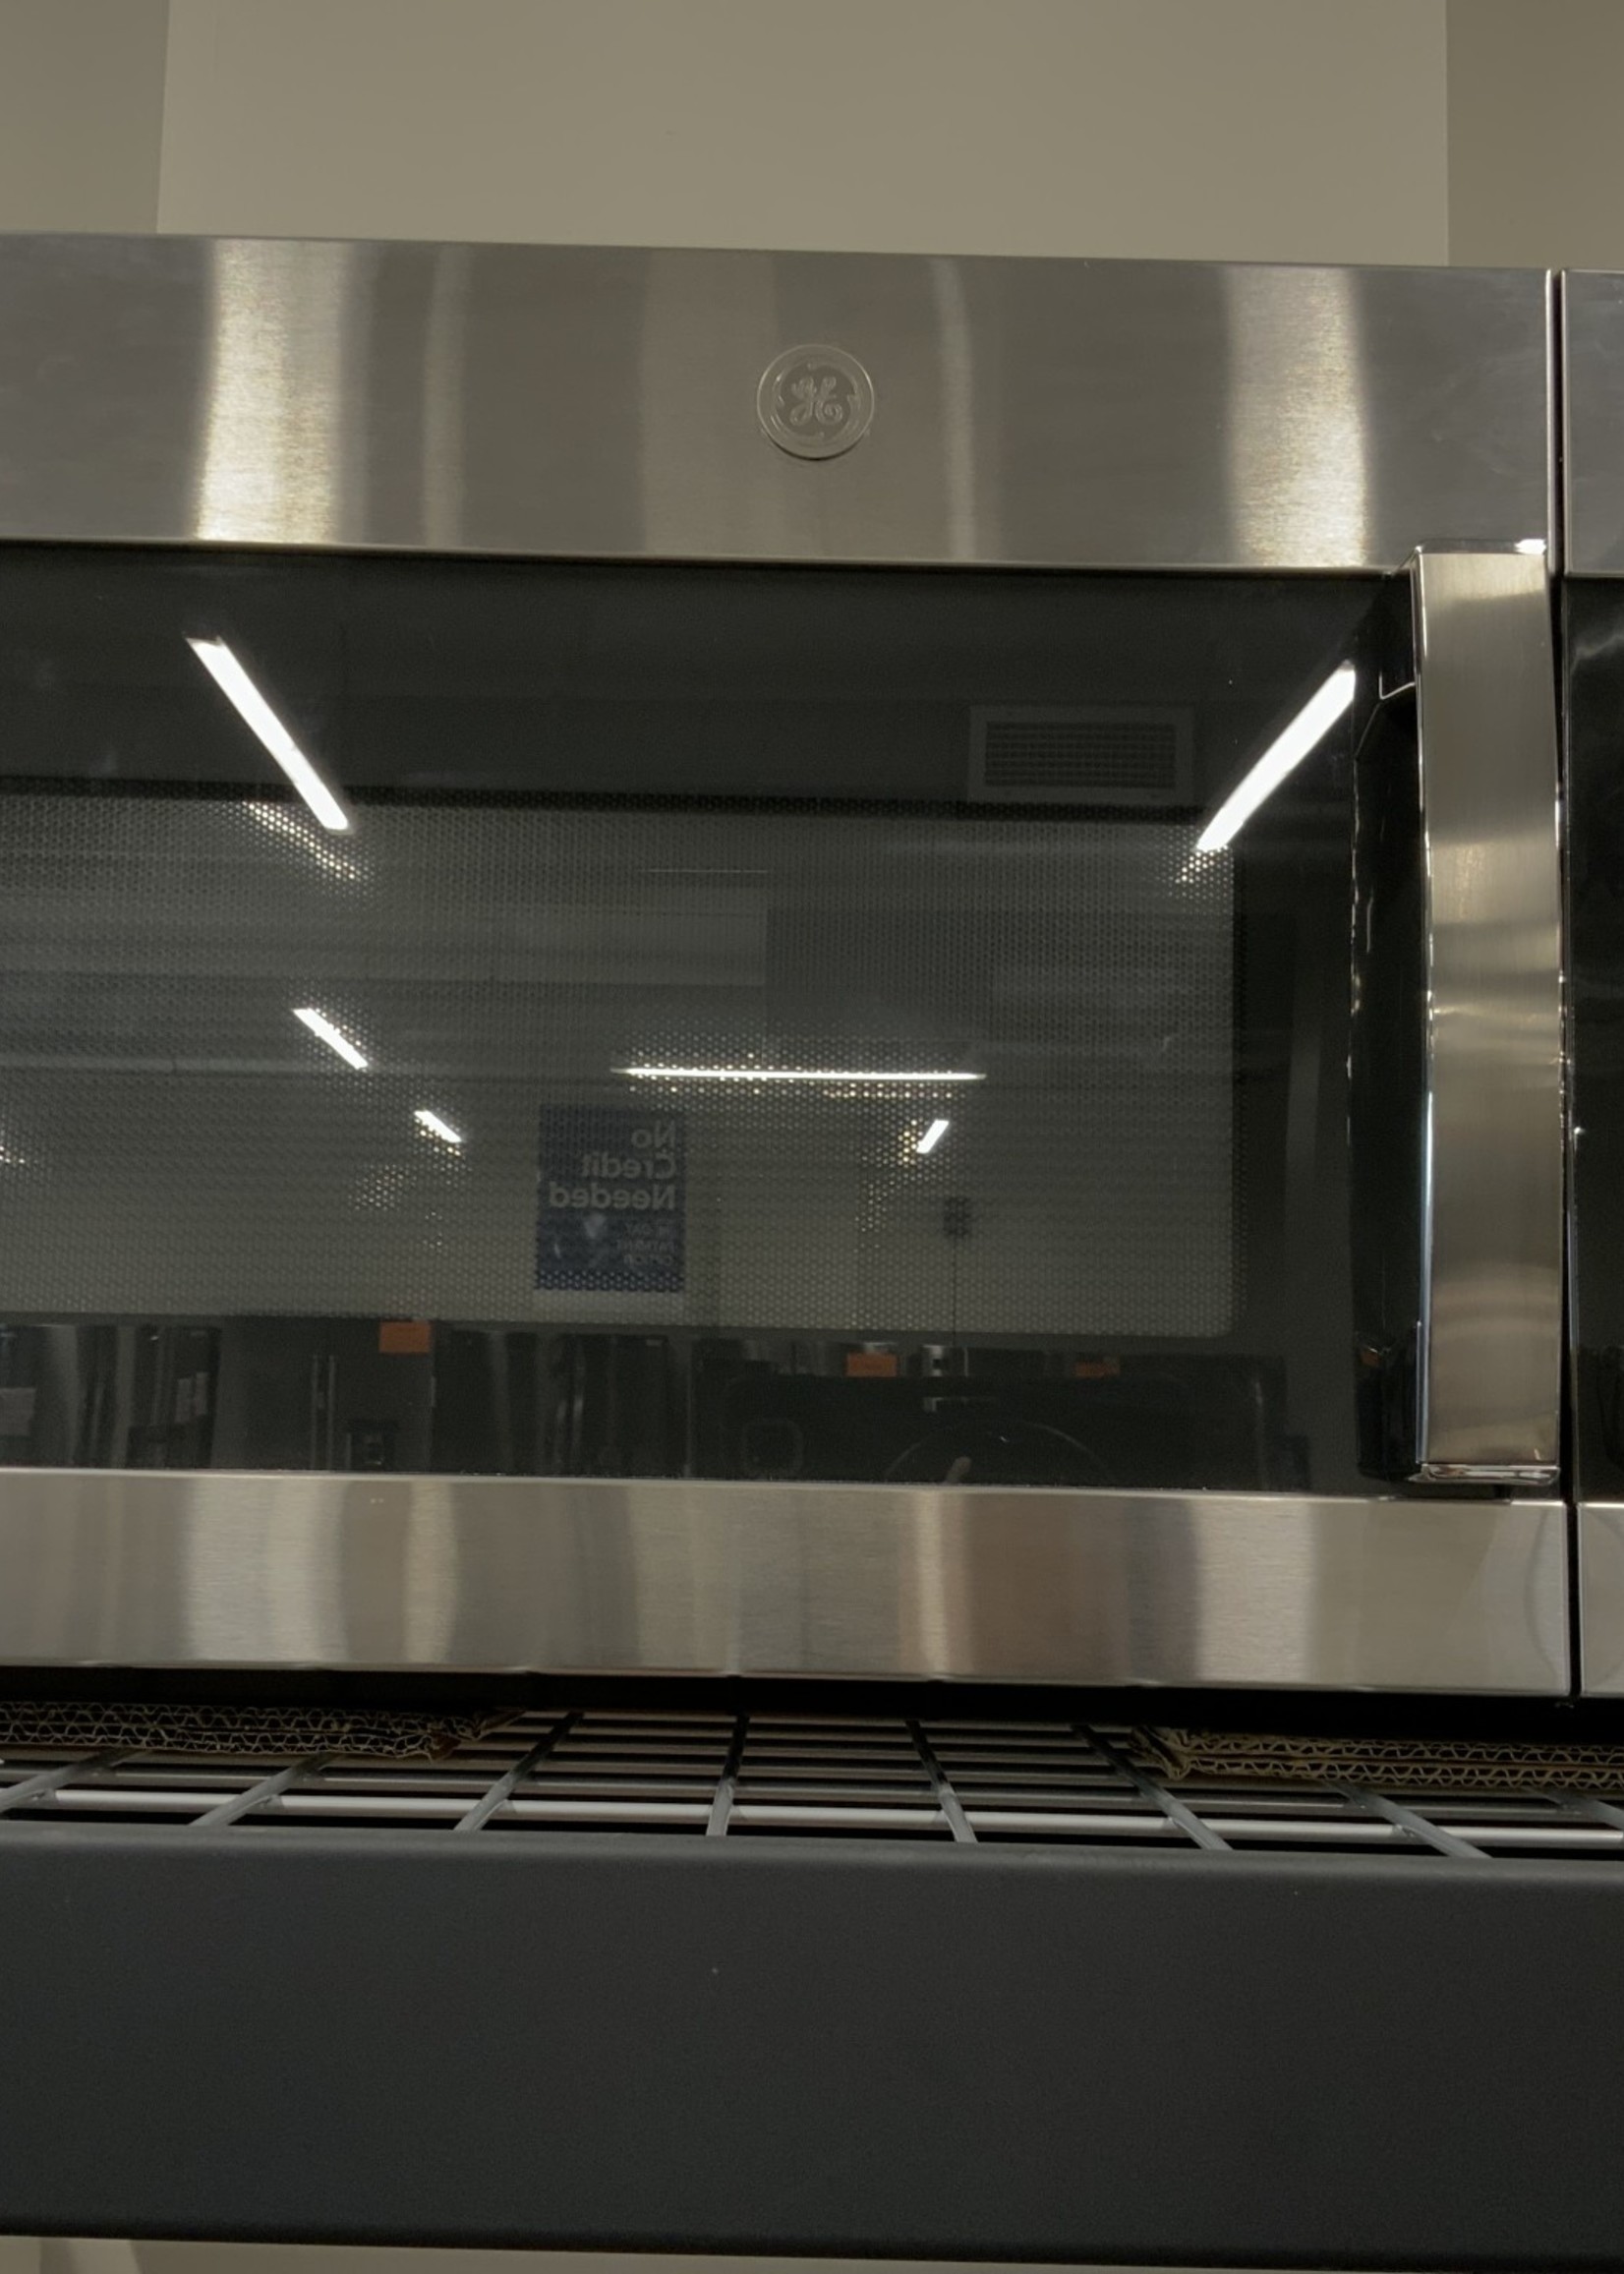 GE GE 1.7 Cu. Ft. Over-the-Range Microwave Oven